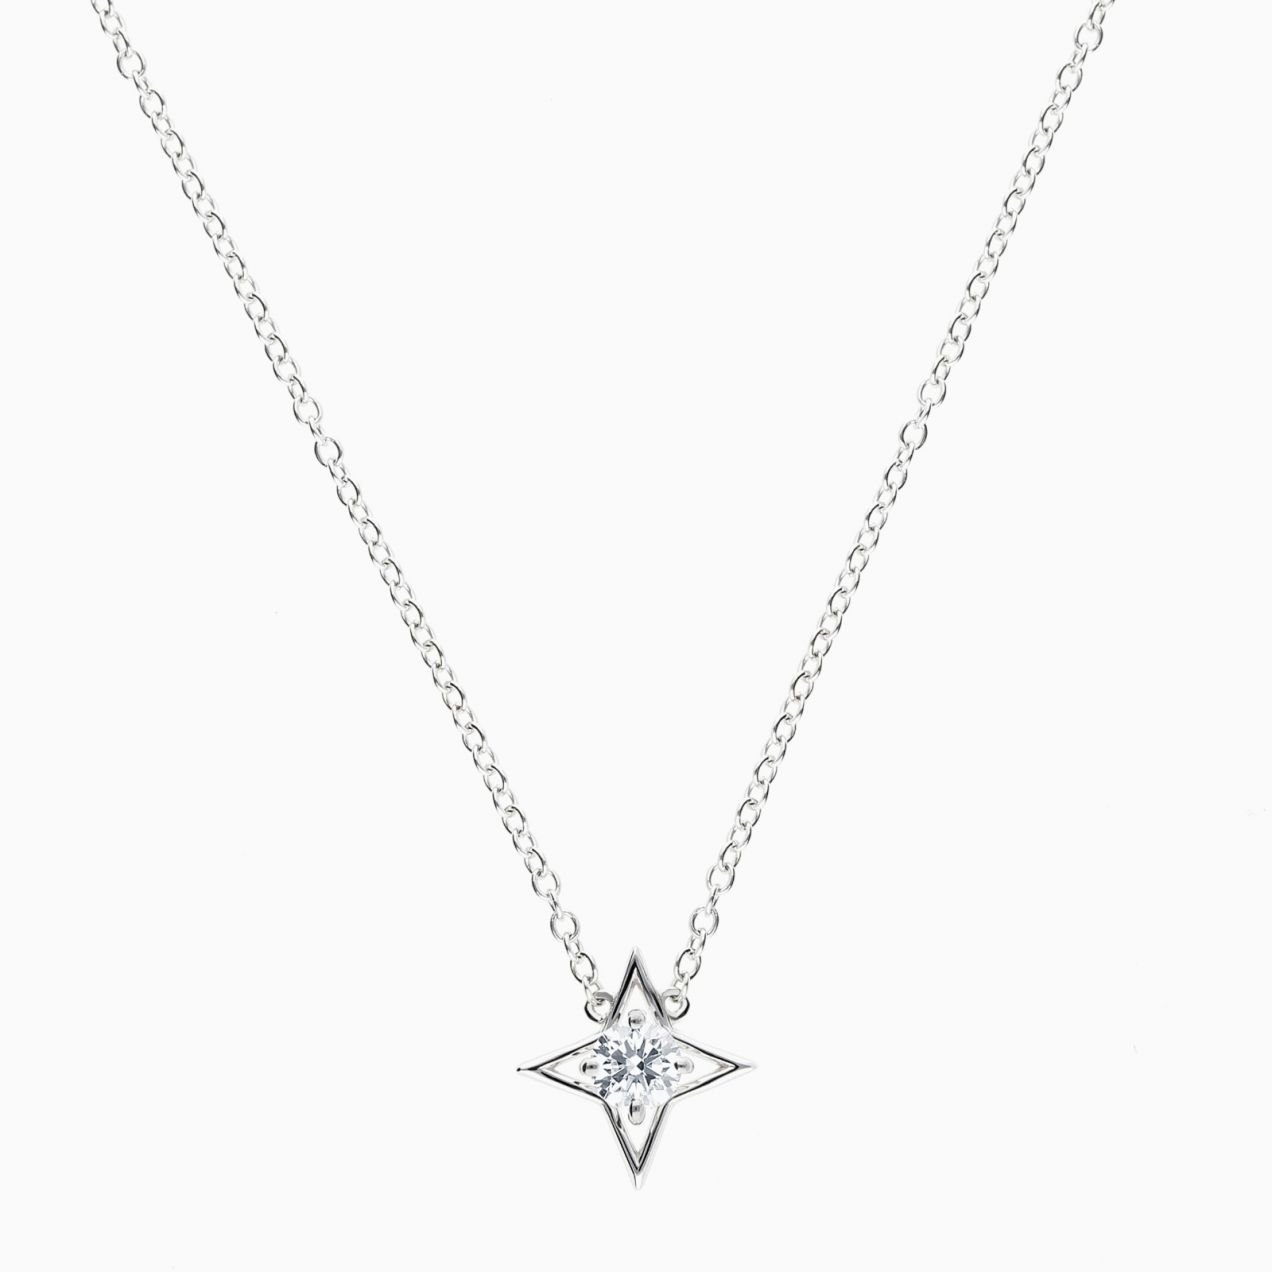 Star solitaire pendant in white gold with a diamond